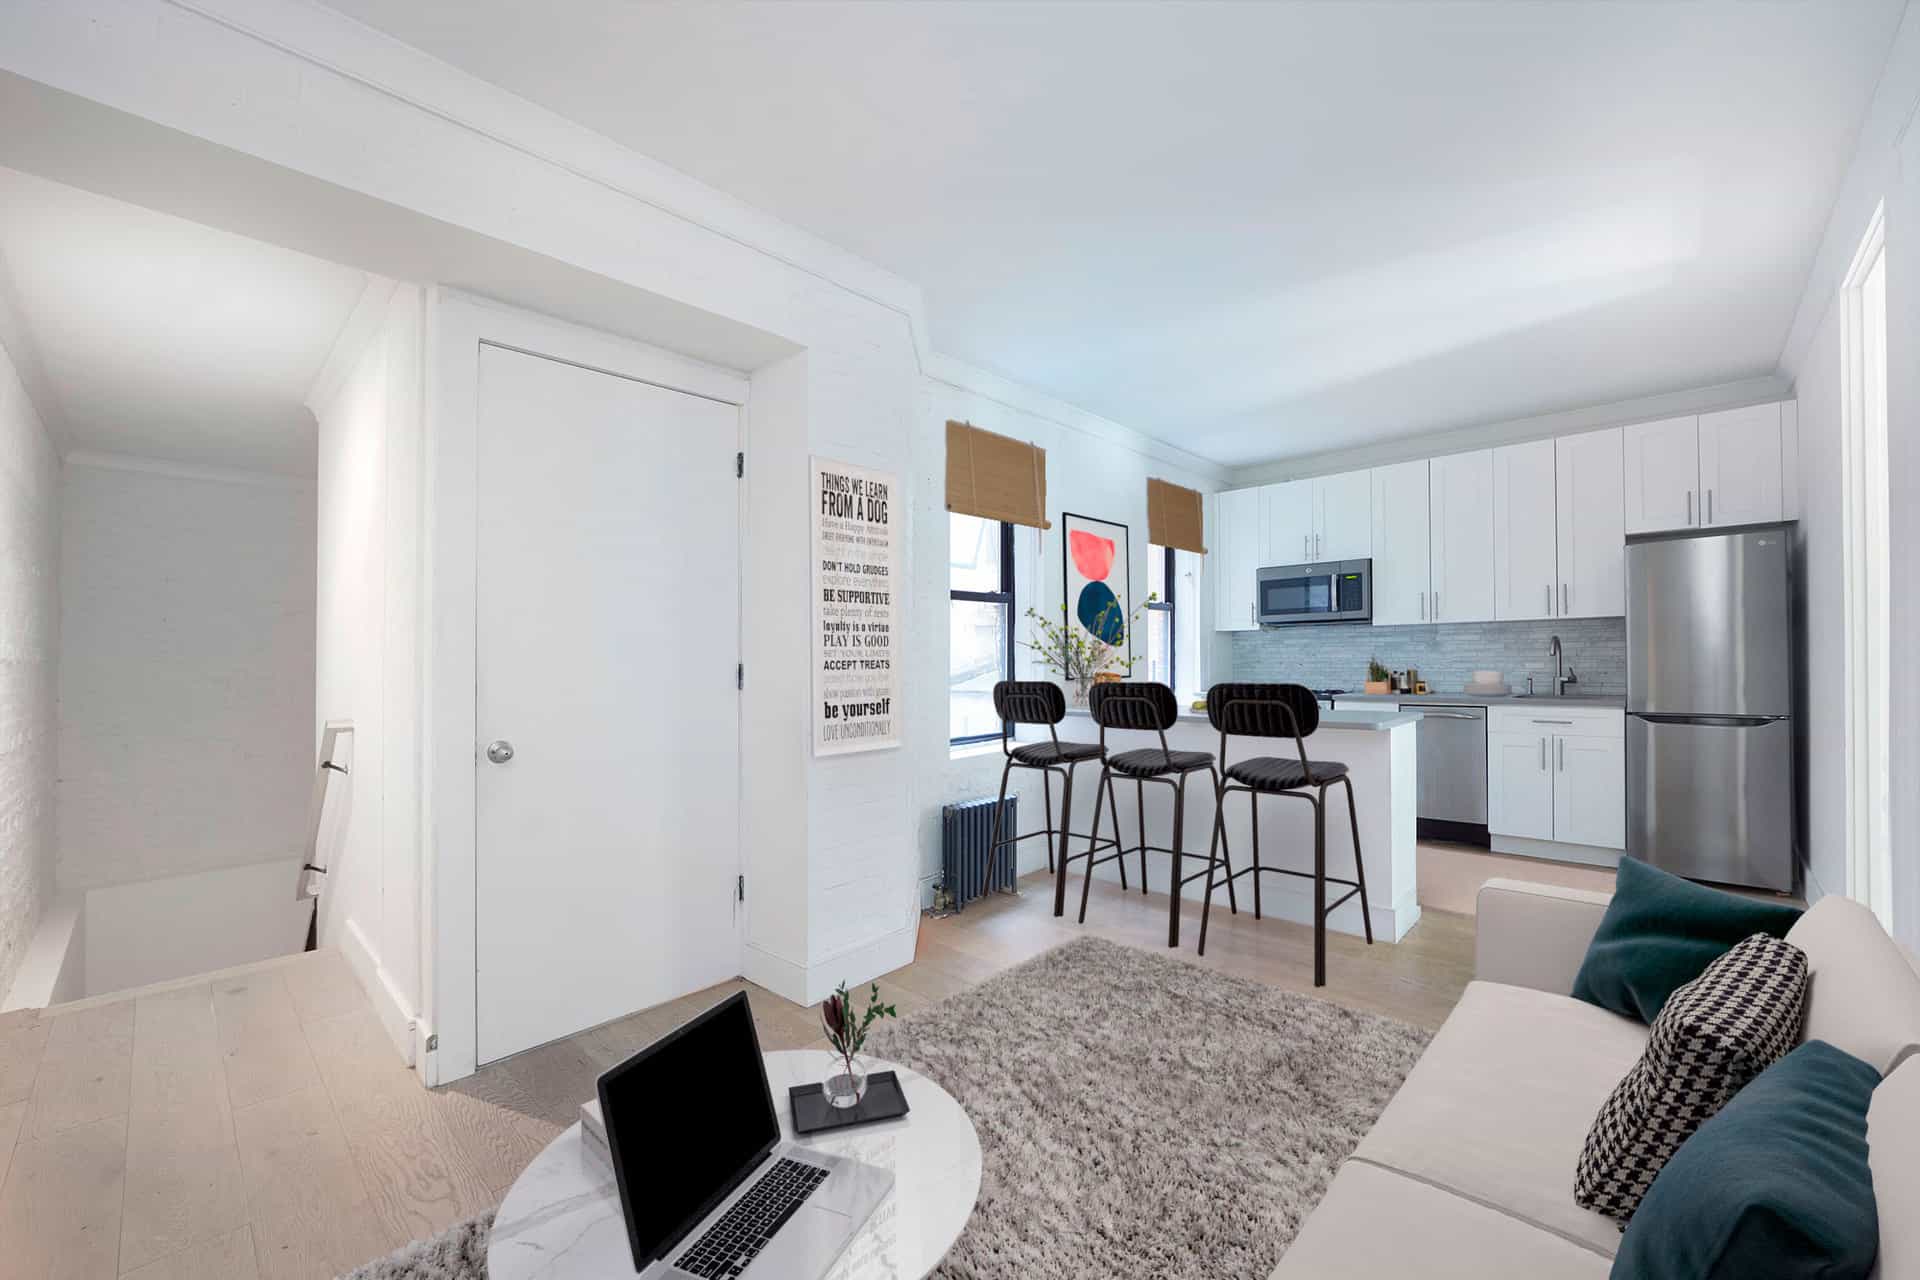 Interior of 245 East 30th Street apartment with hardwood floors, stainless steel appliances and a brown living room rug.